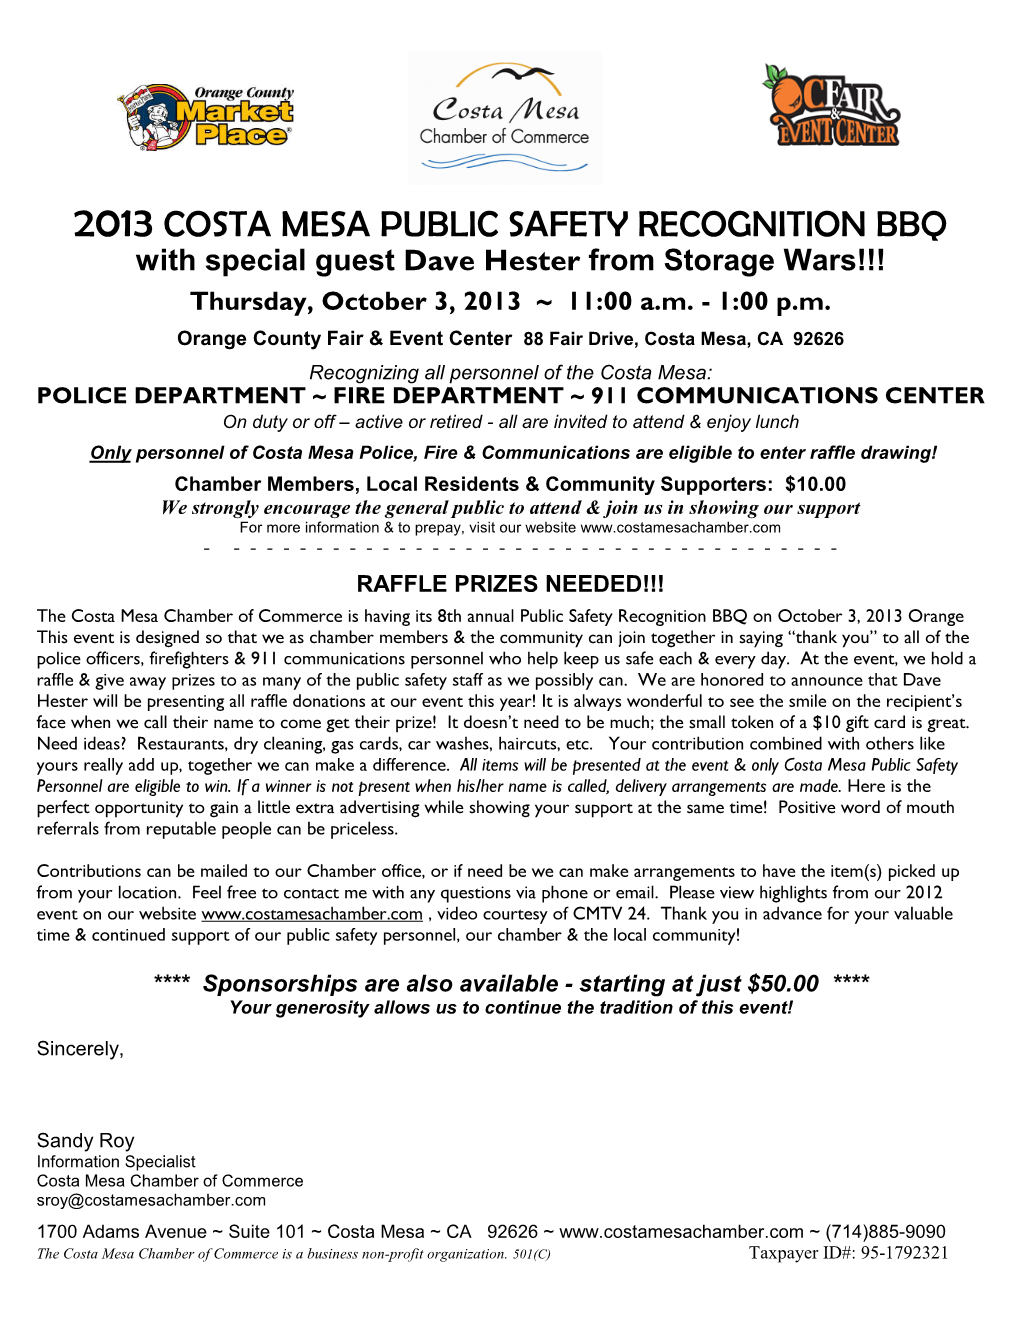 2013 PUBLIC SAFETY BBQ Raffle Request Letter